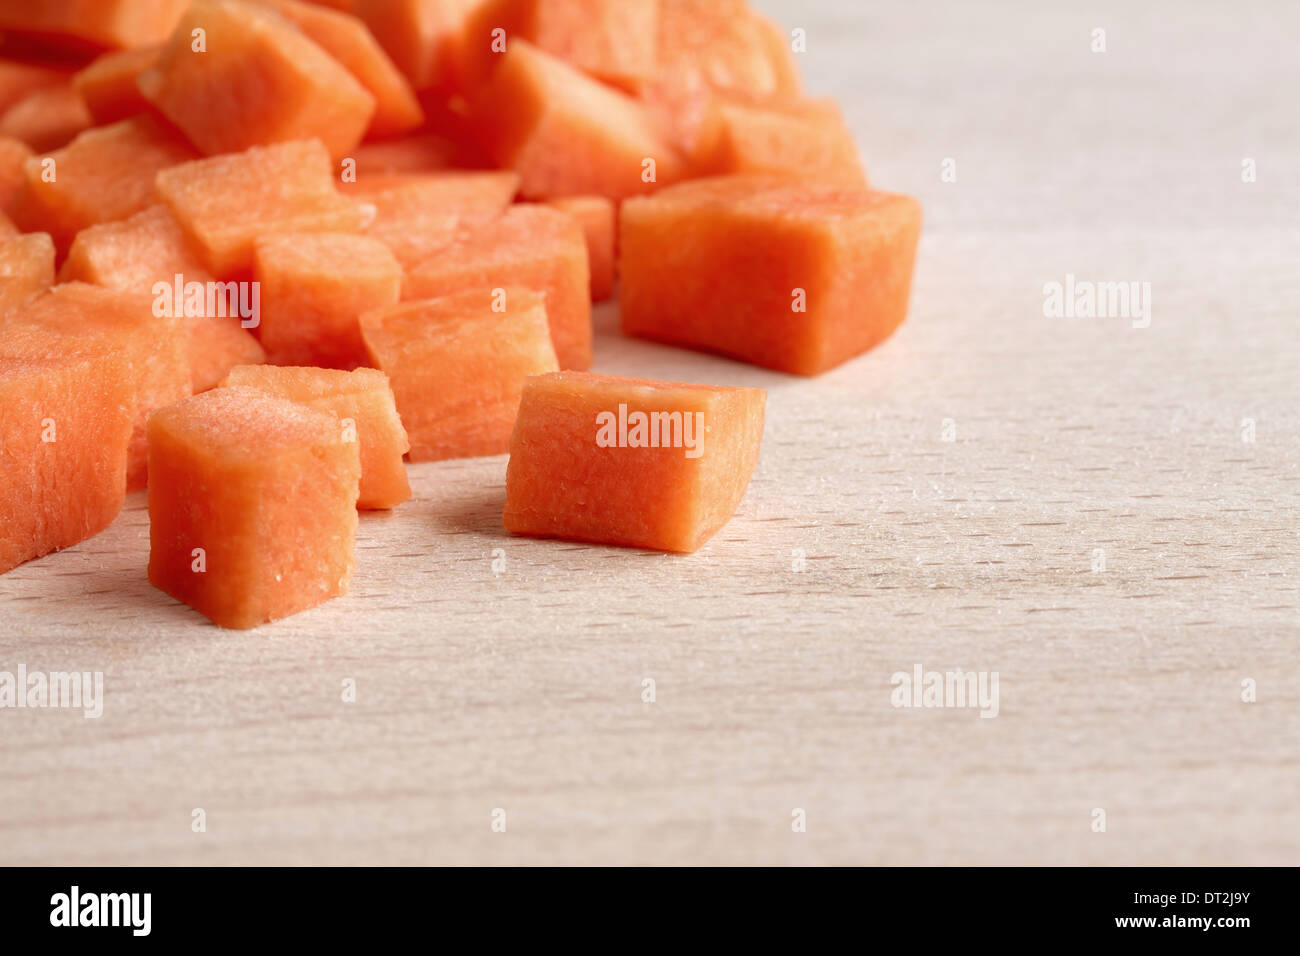 Diced raw carrots on a wooden chopping board Stock Photo